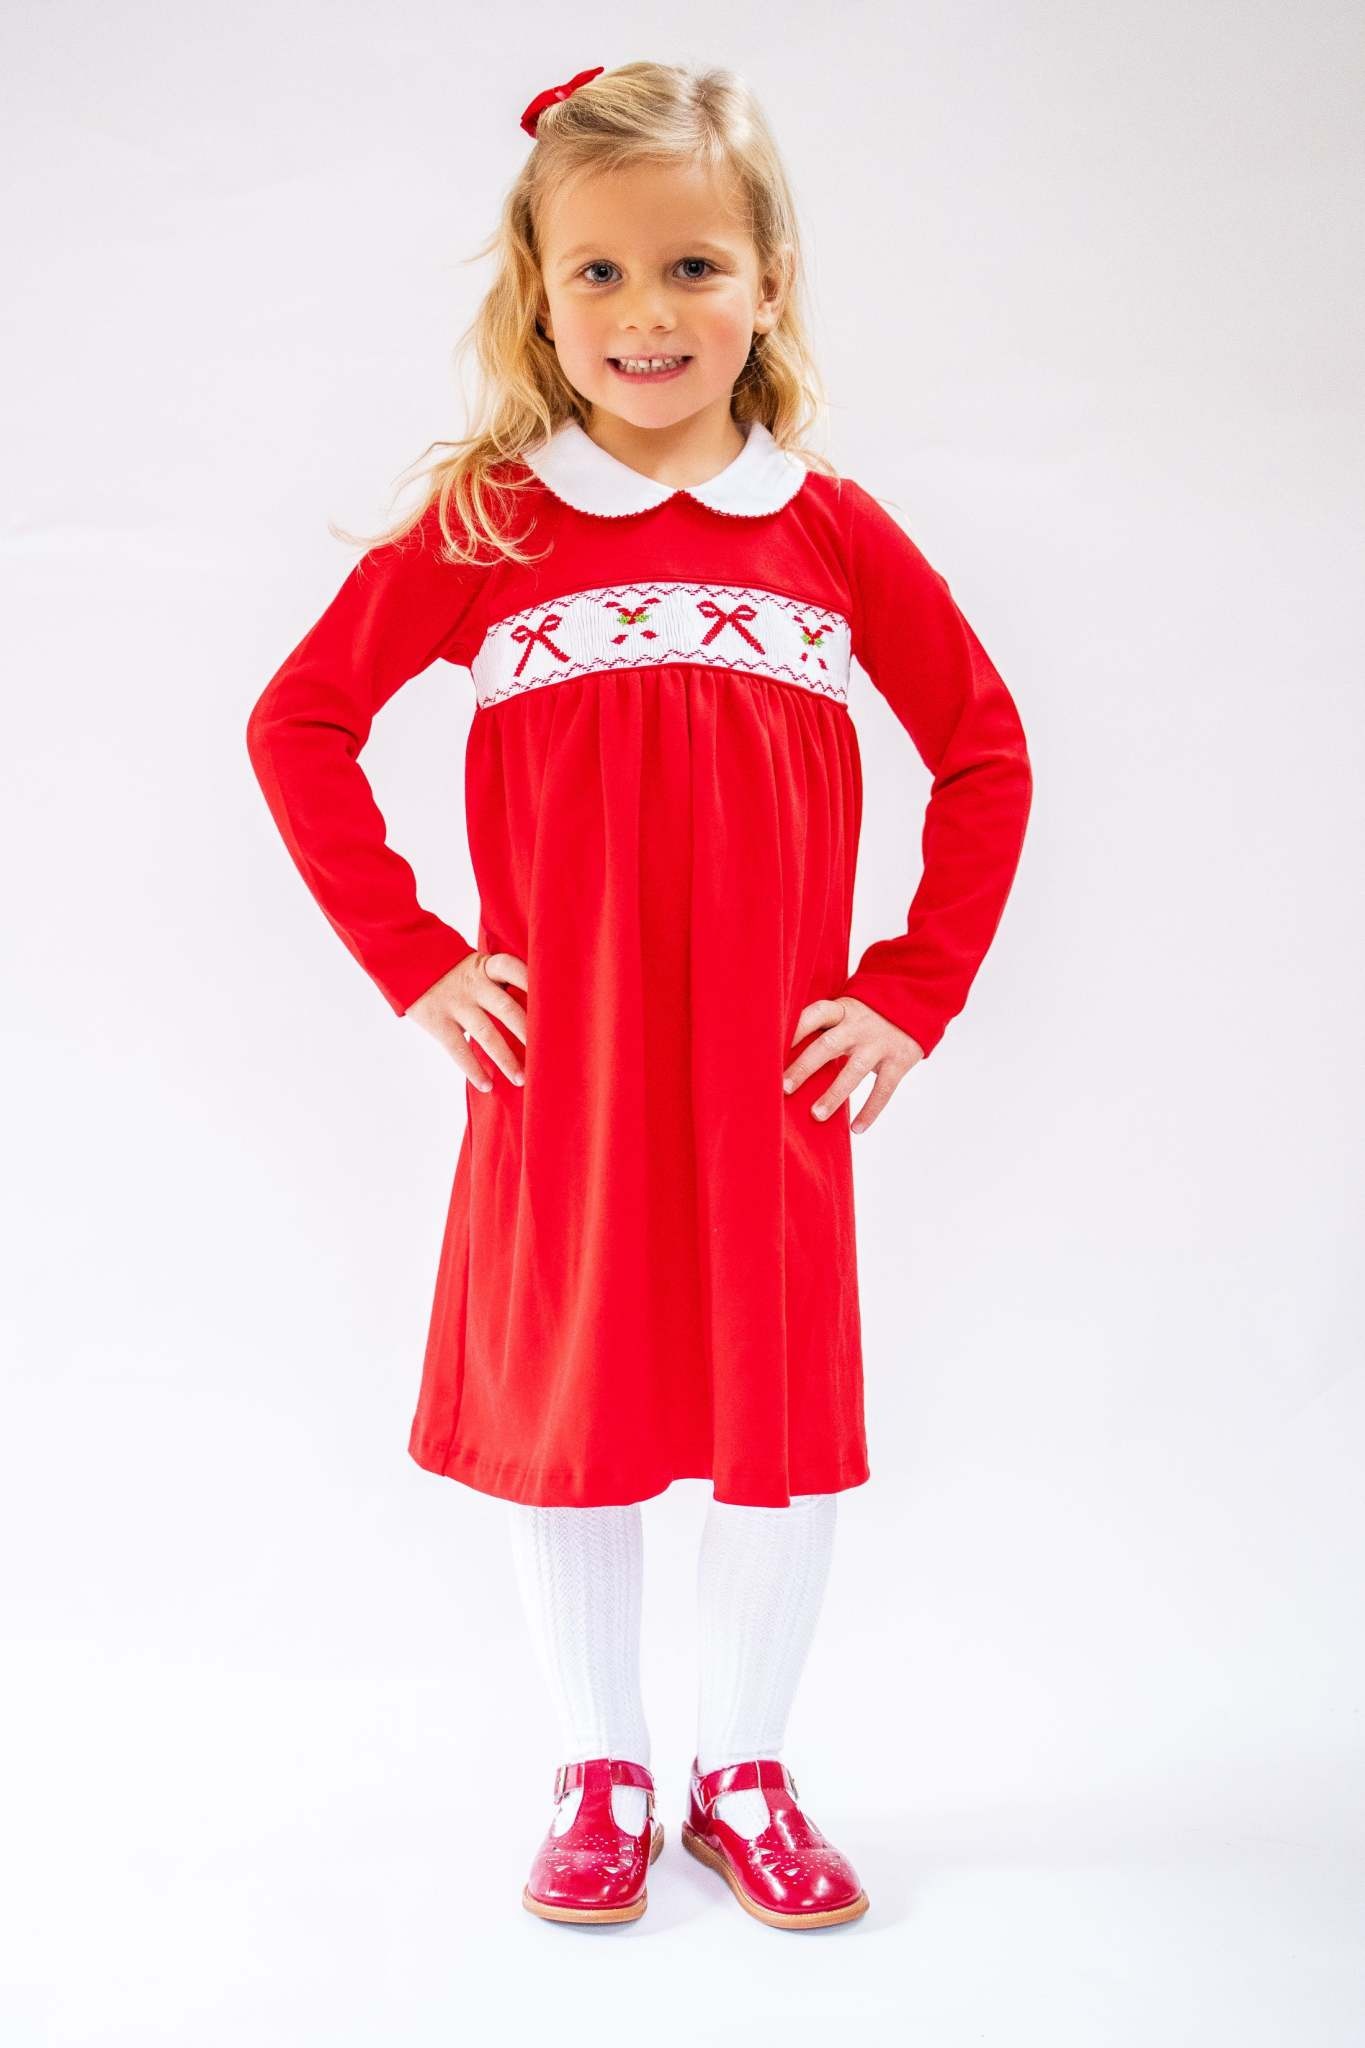 Maddie & Connor Maddie & Connor Pima Candy Cane Smocked Bow Dress